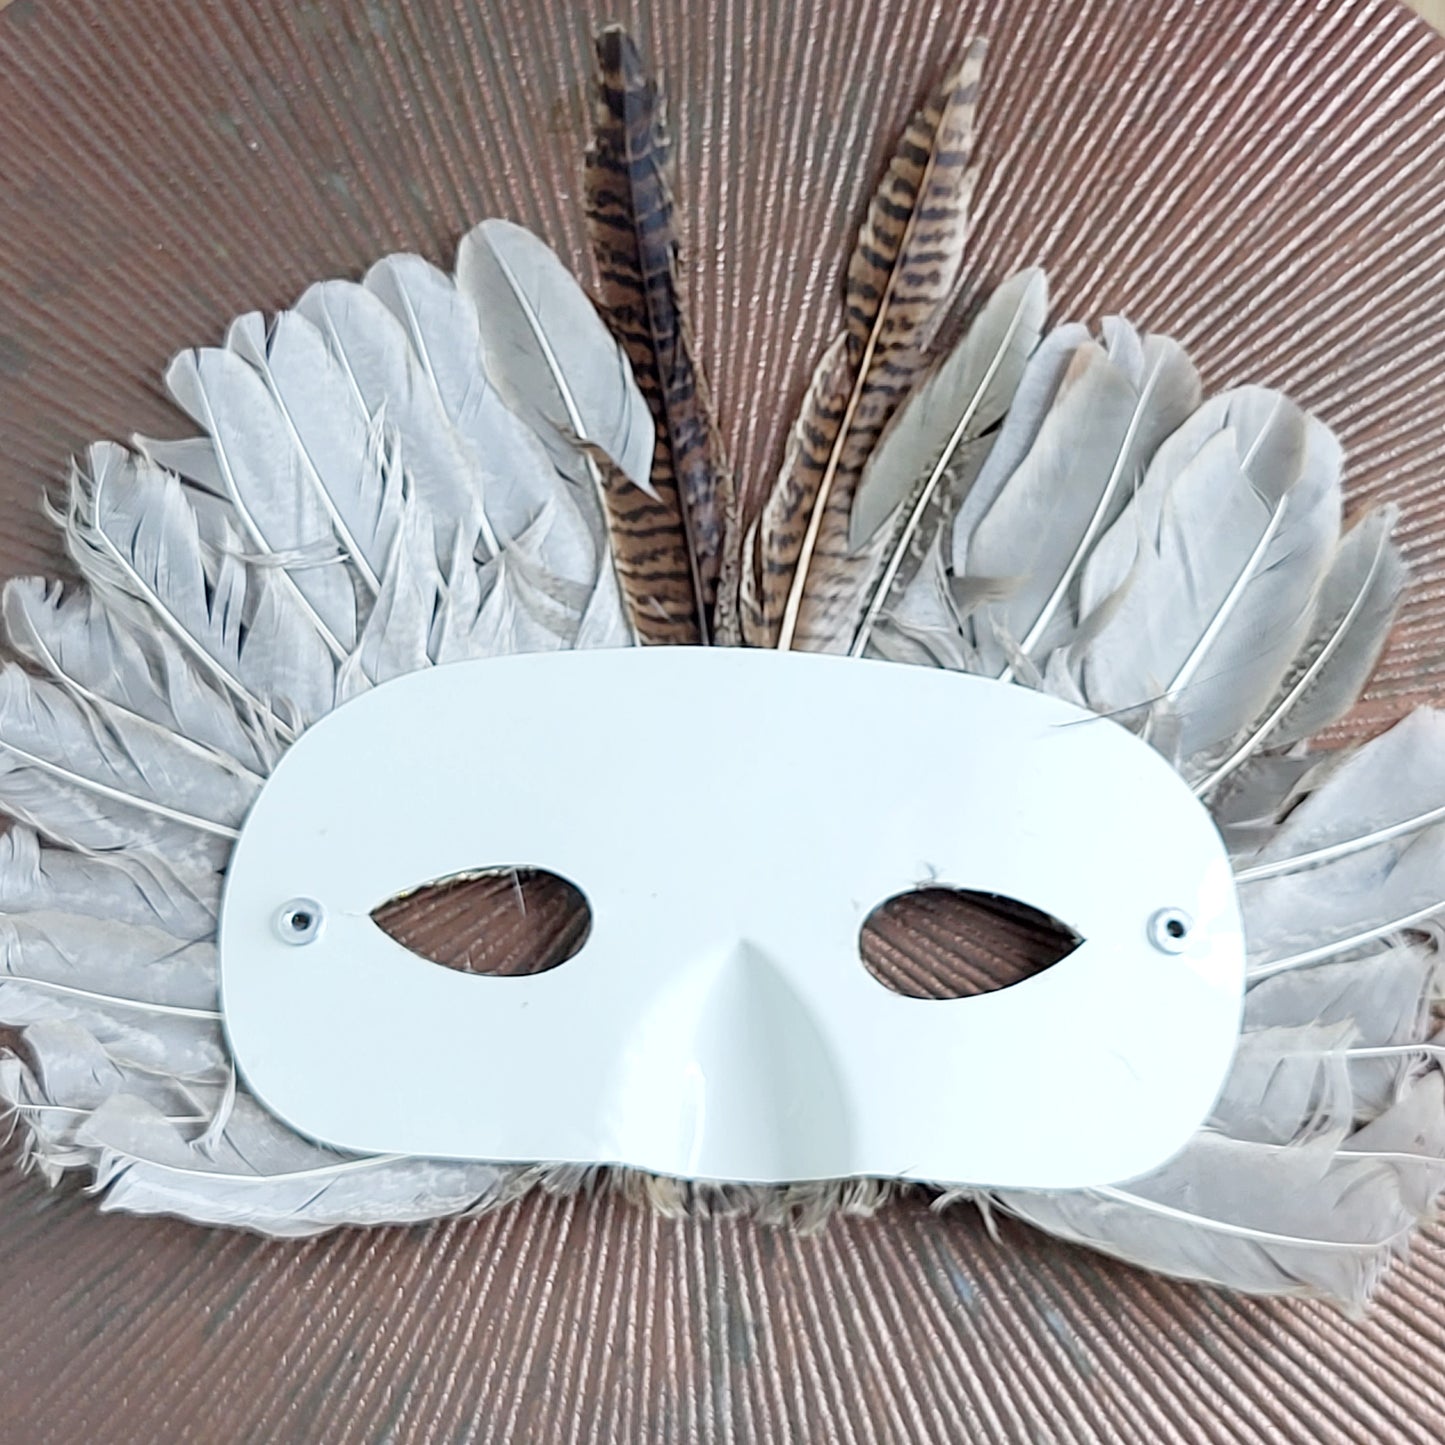 RWNDZ - Feather masquerade mask, good condition bit needs to string so it can stay on